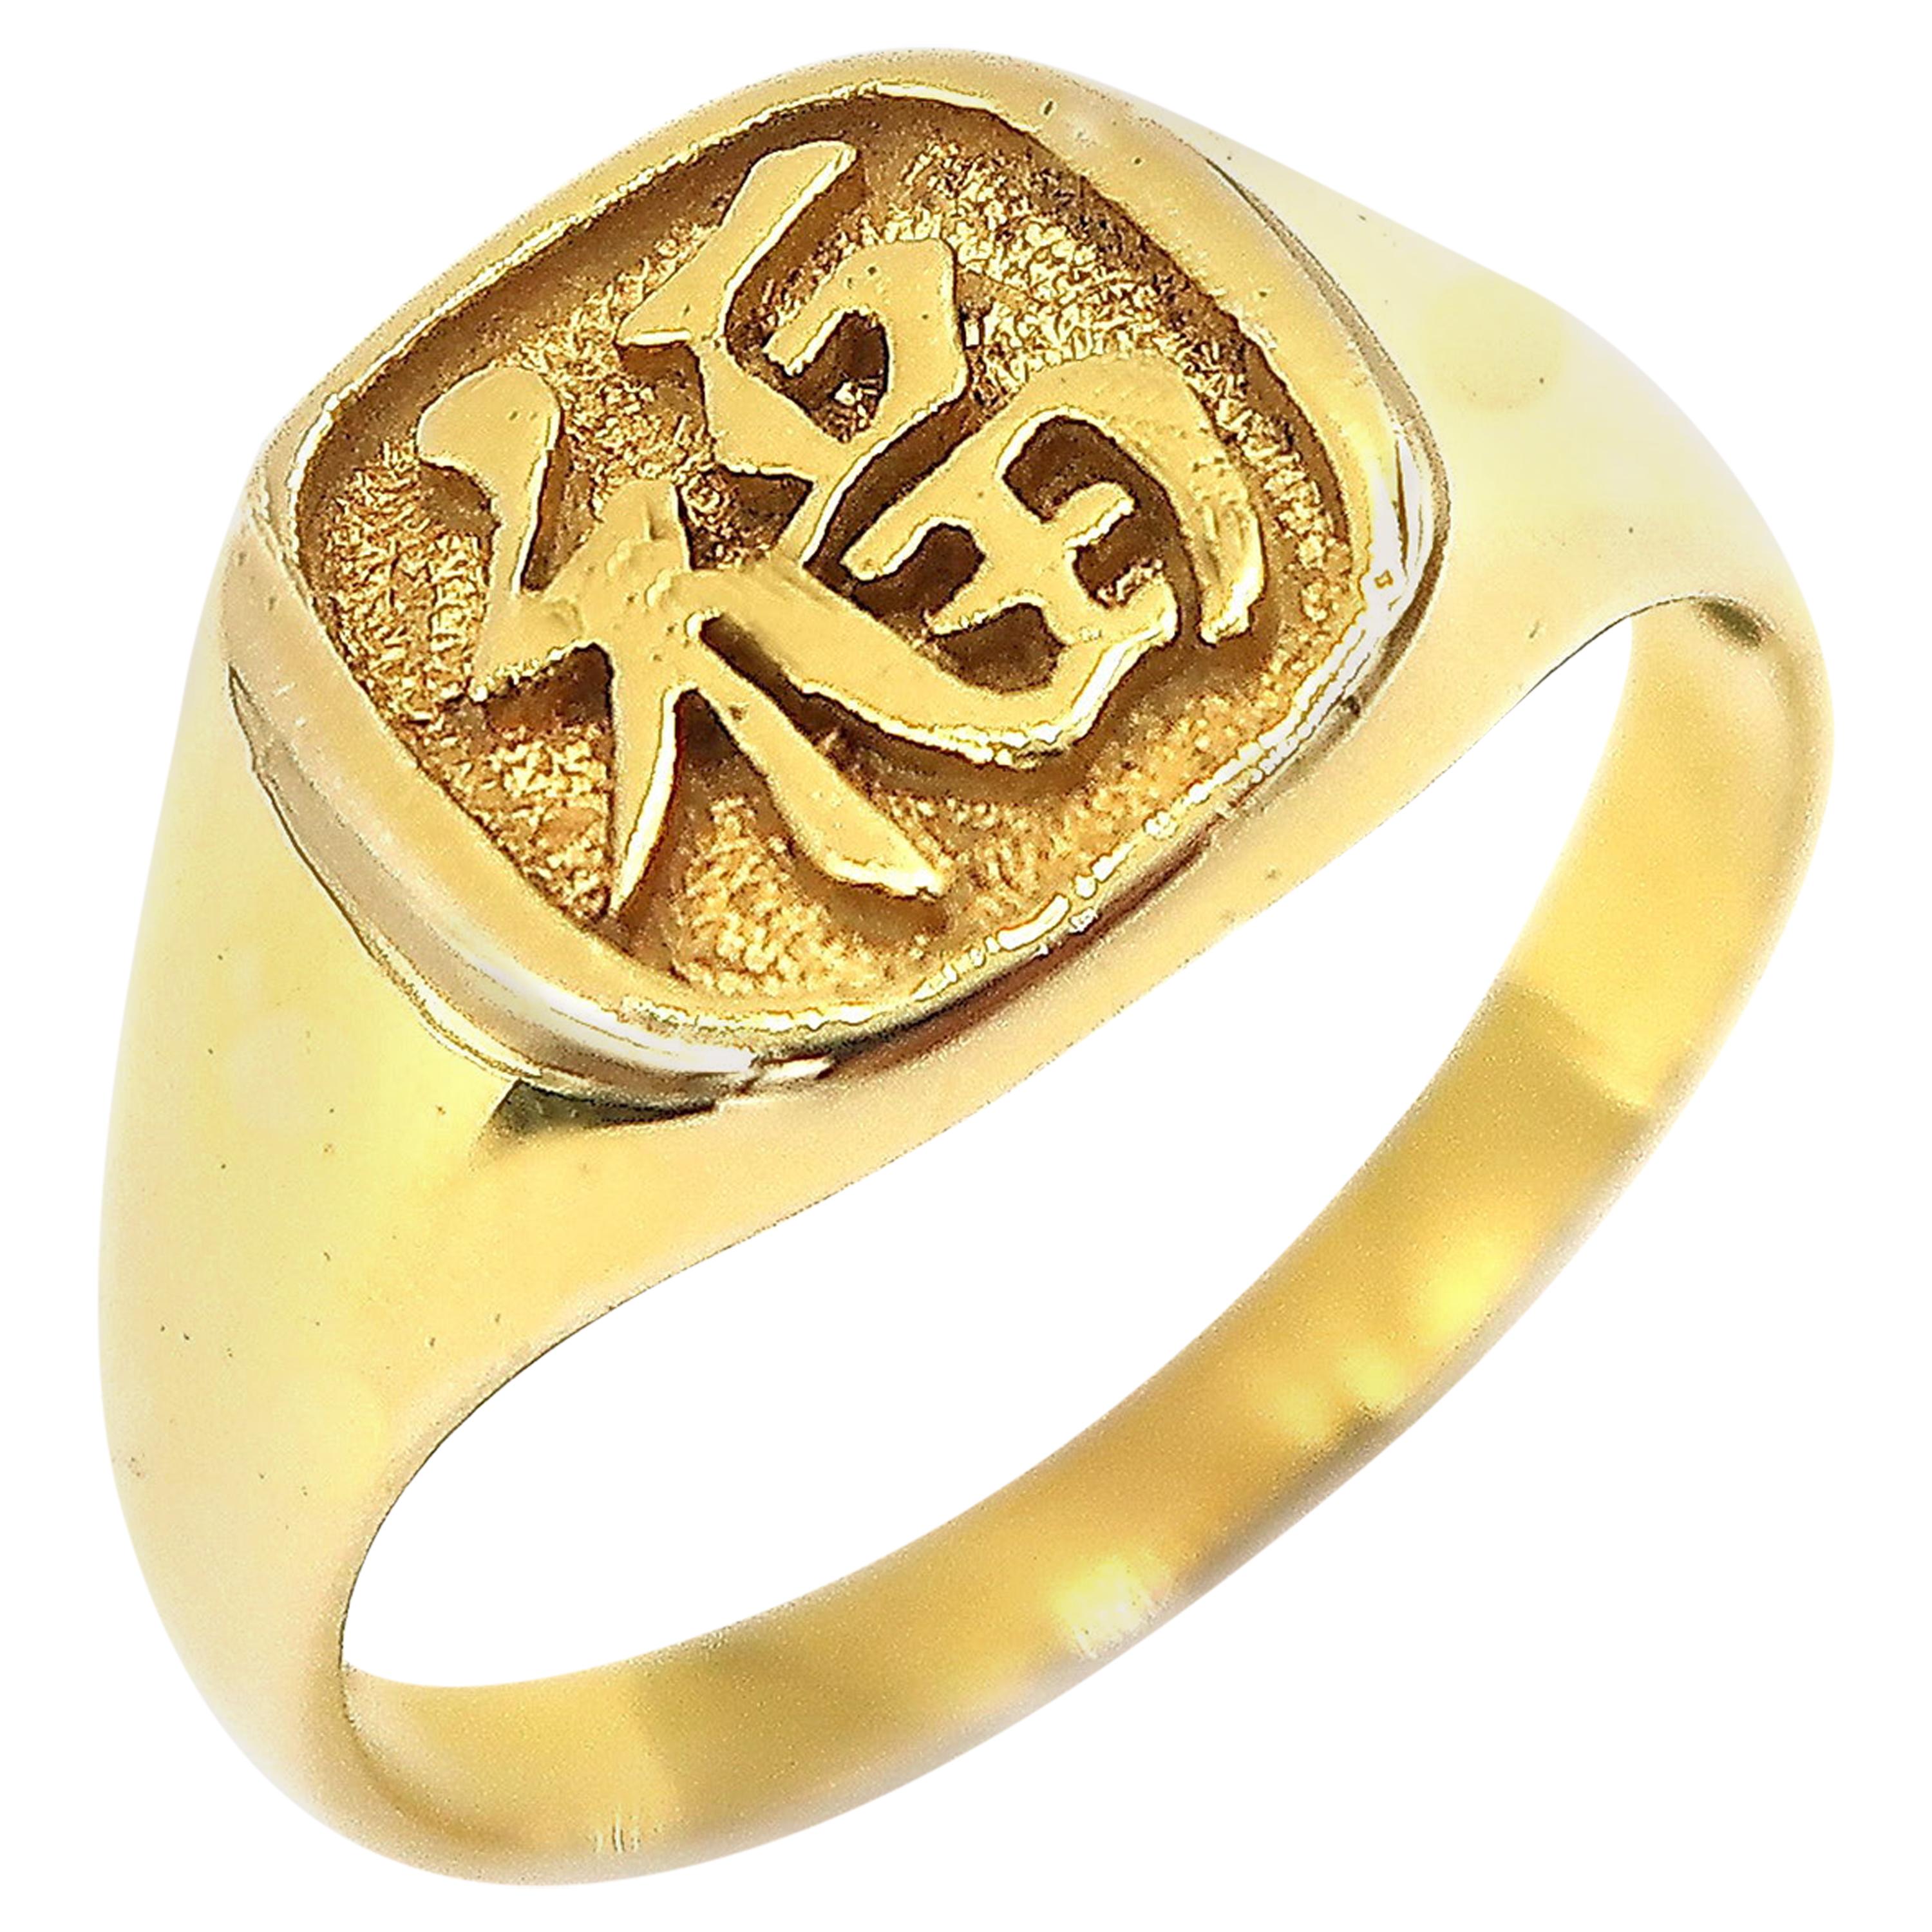 Chinese Character Fortune Luck Happiness 18 Karat Yellow Gold Signet Men's Ring